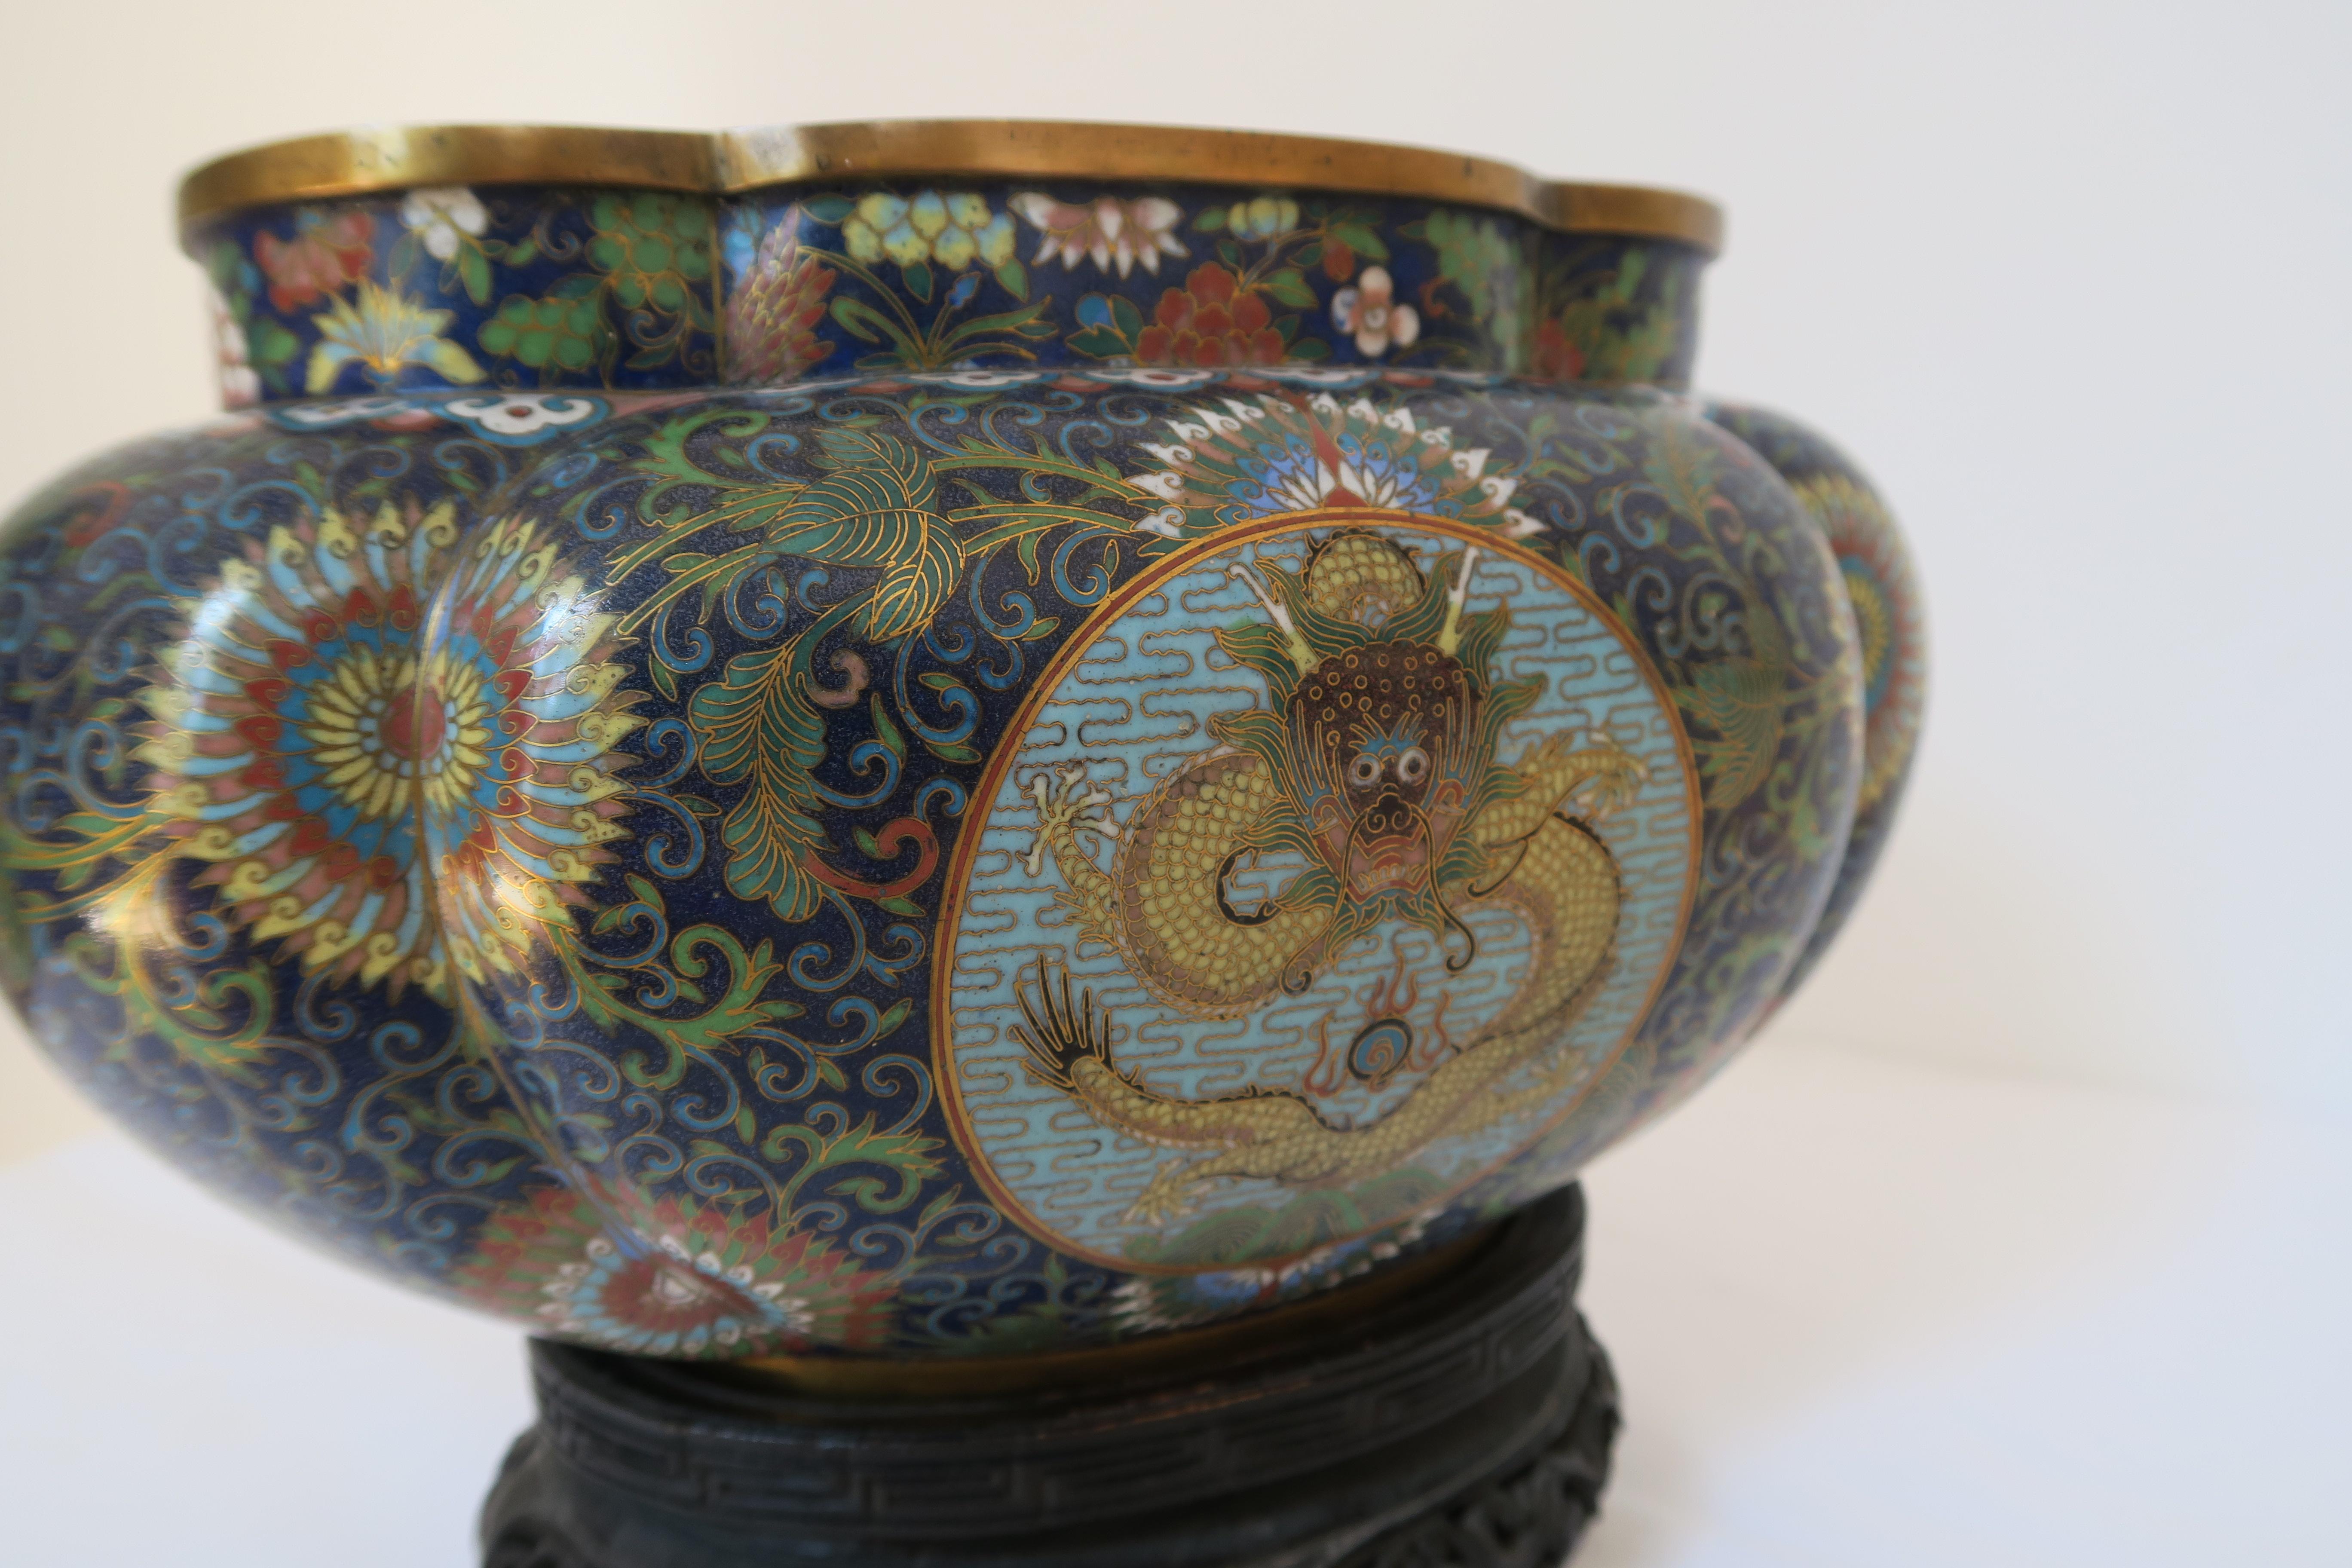 Chinese enamel Cloisonné vase, bowl, jardinere, featuring a dragon depiction from Jiaqing-Period with wooden stand. Both items in excellent condition with no dents or scratches.

Measures: total height 29.5 cm.
Width 26 cm.
Total depth 8.5cm.